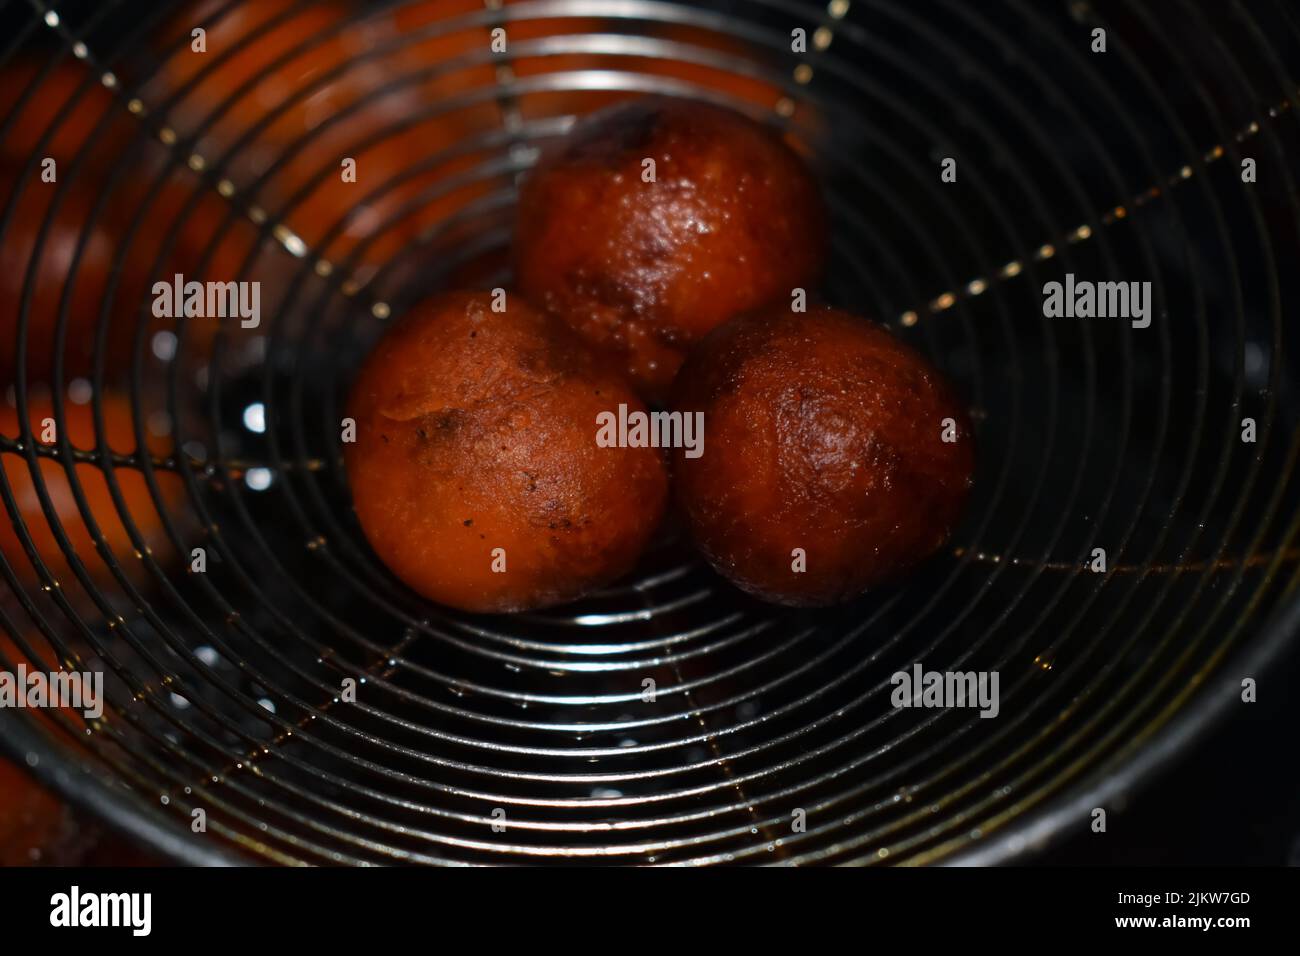 Indian Sweet Gulab Jamun is a Syrupy Dessert Popular in India. Stock Photo